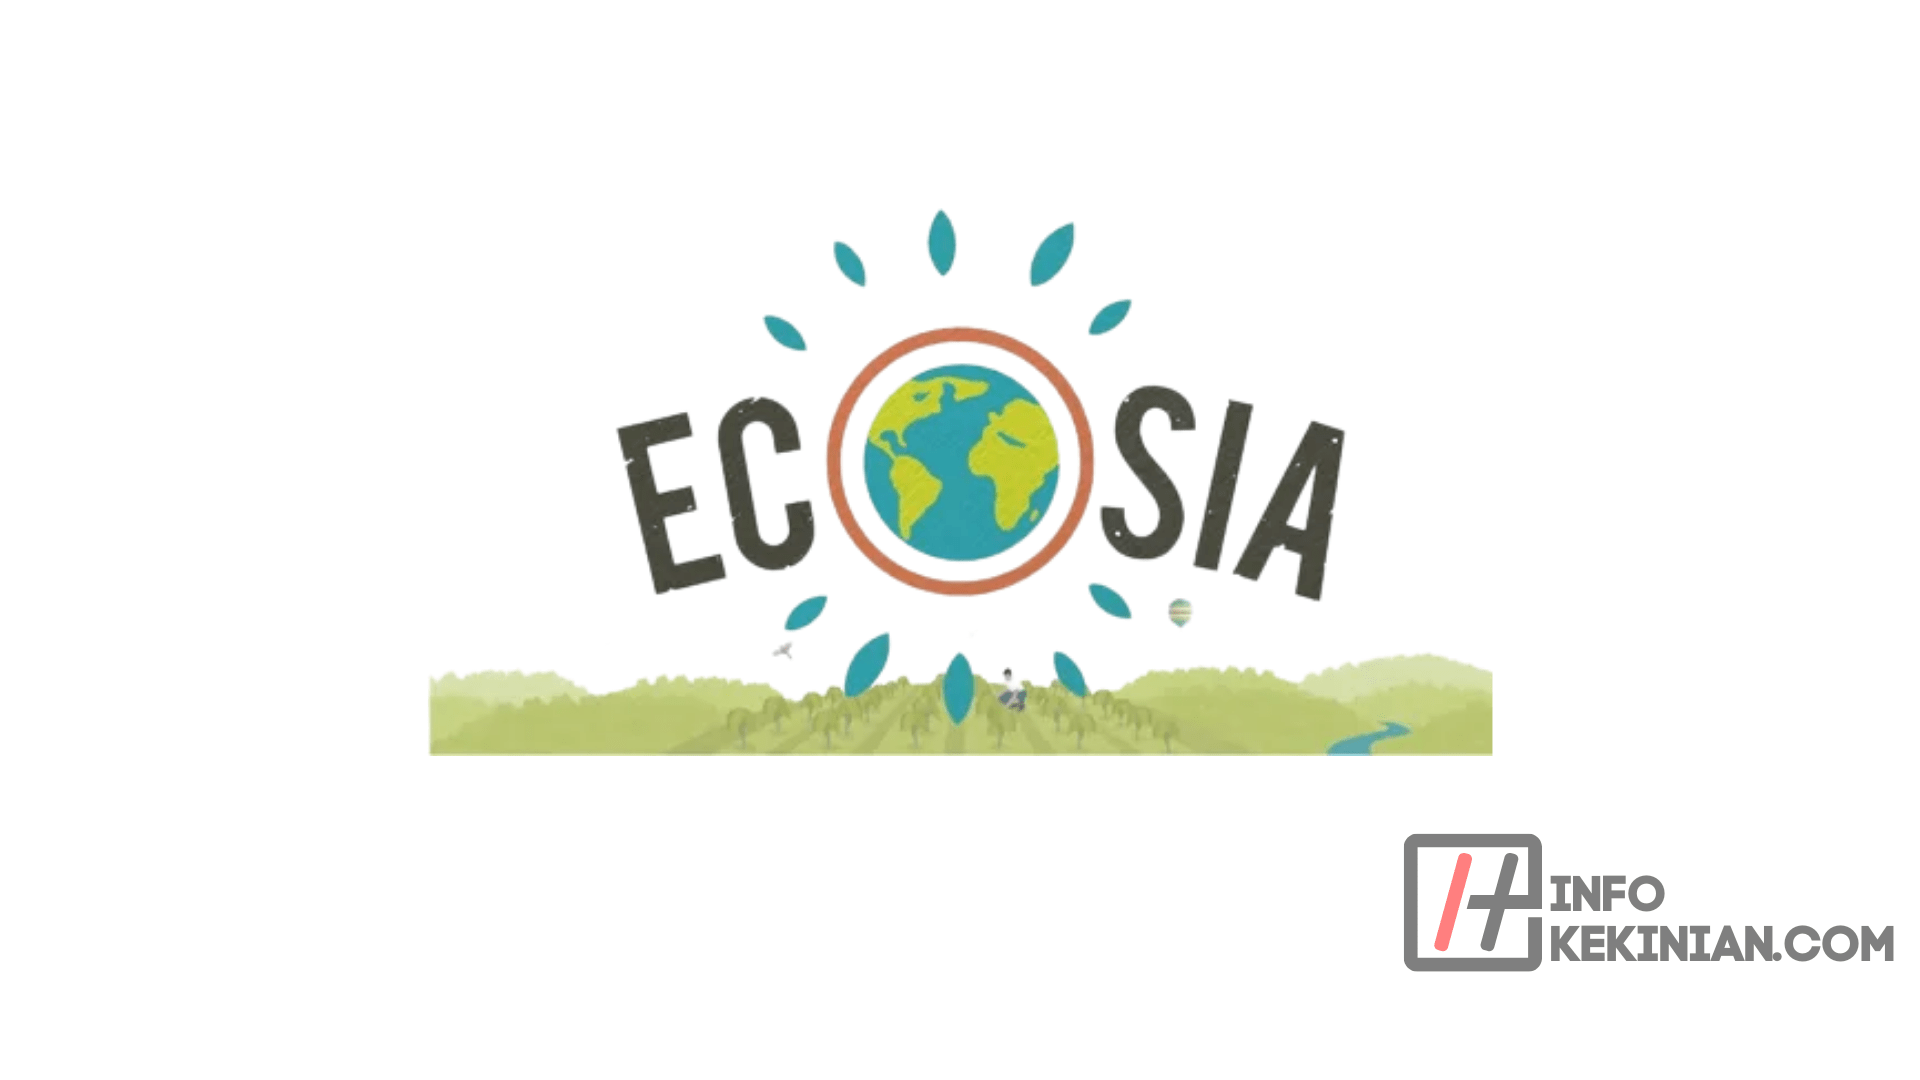 What is Ecosia Site (2)